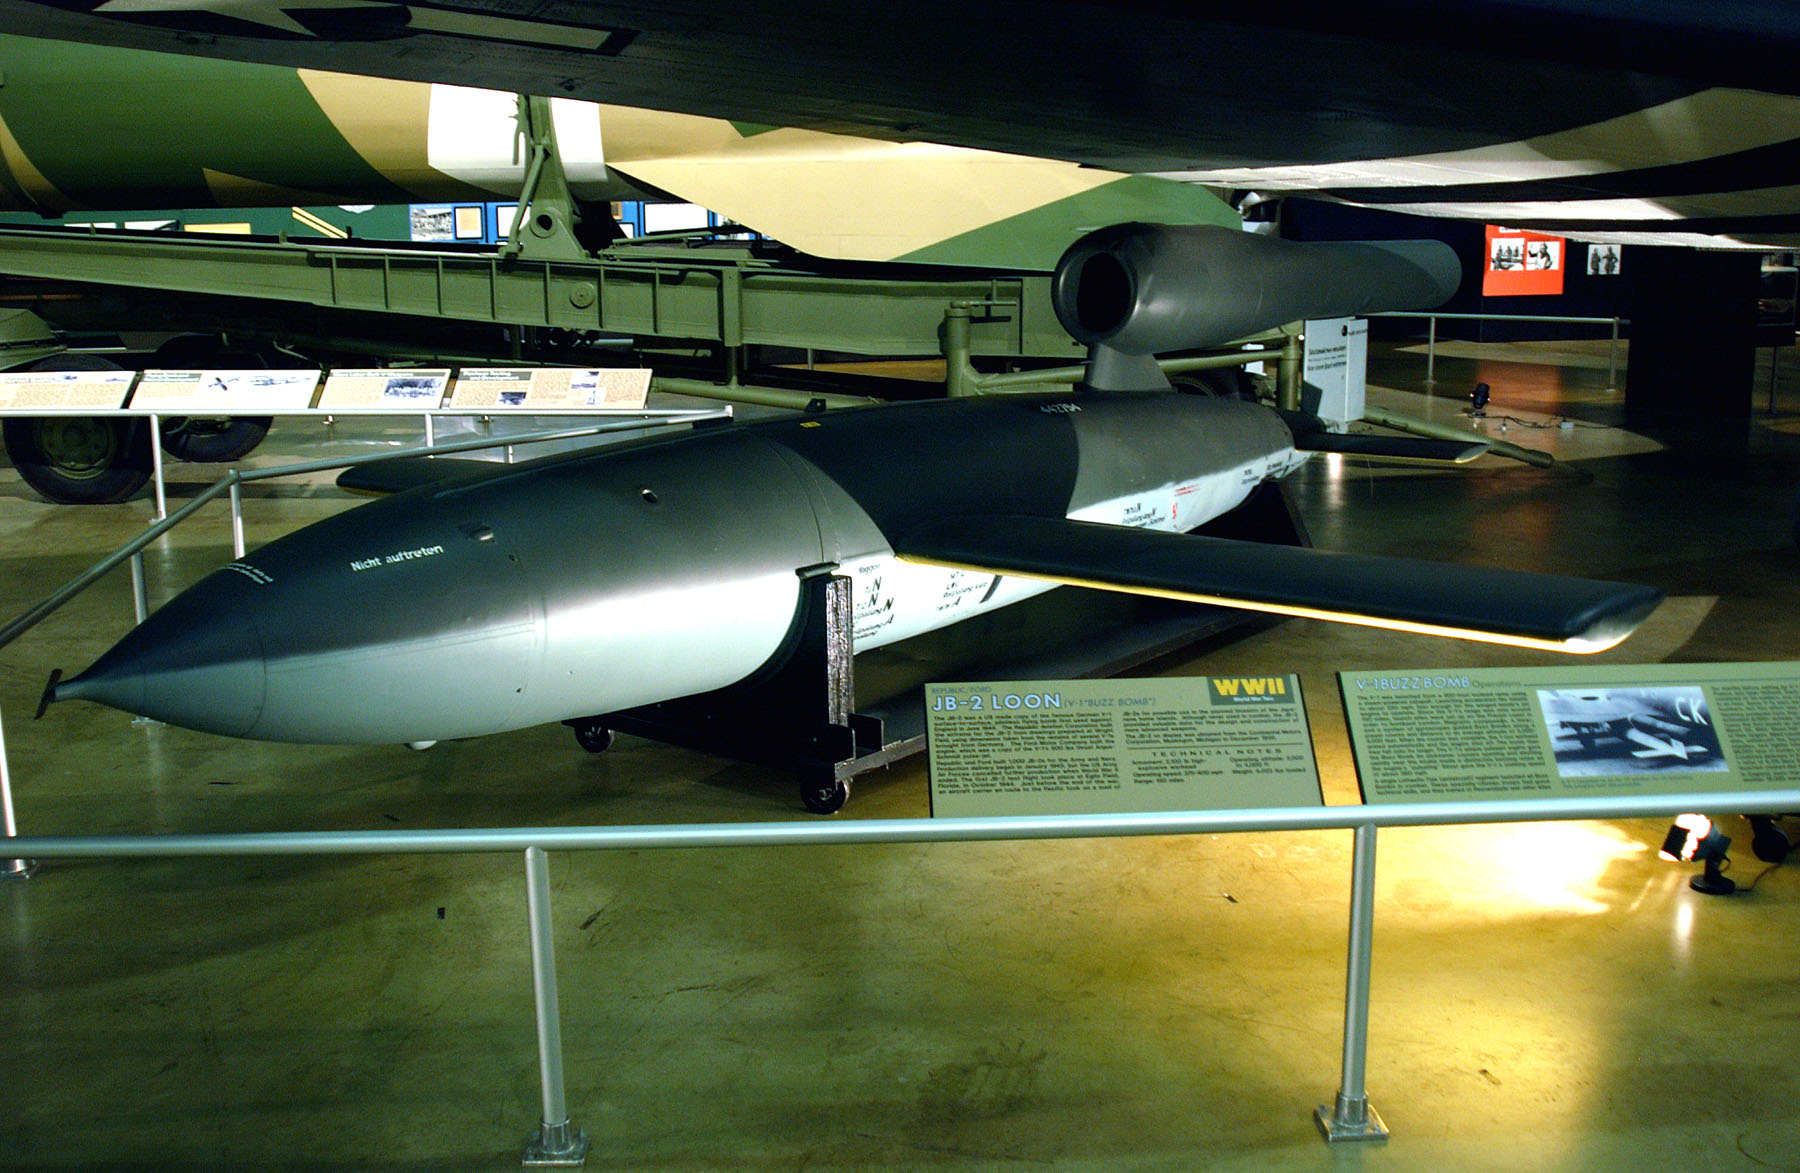 Republic/Ford JB-2 Loon (V-1 Buzz Bomb) > National Museum of the